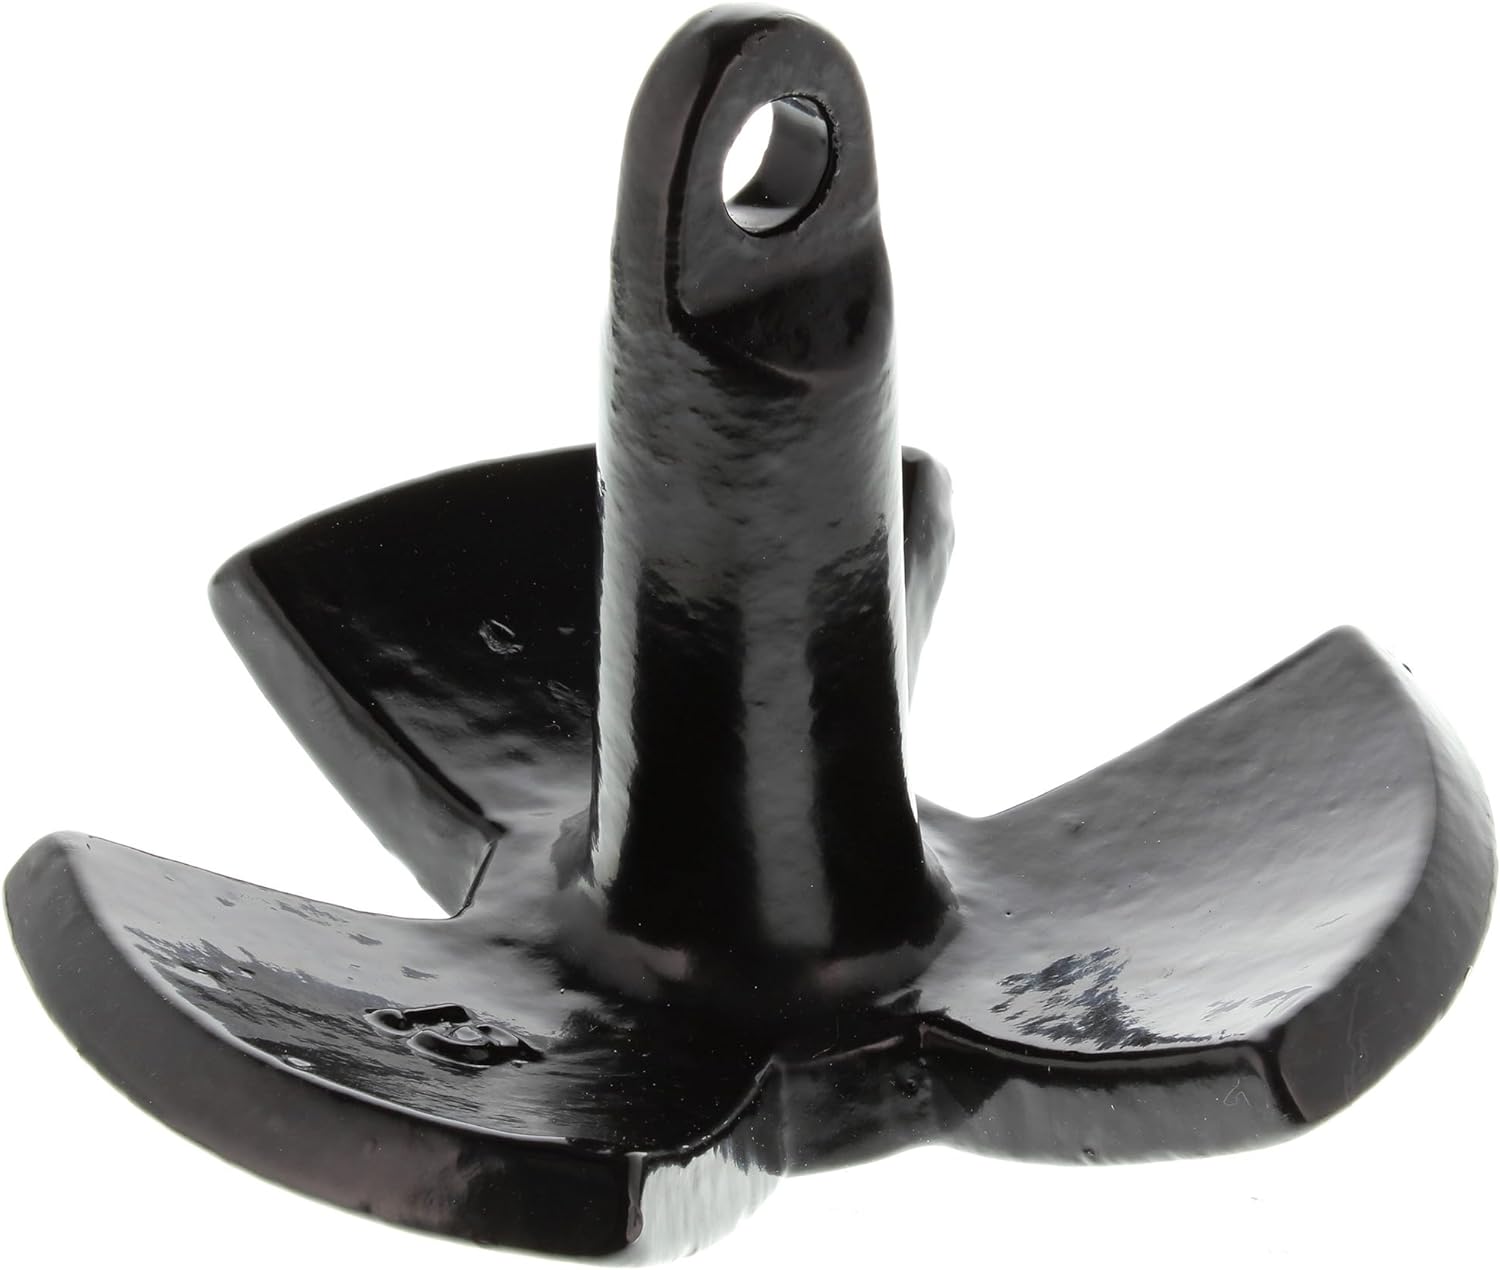 SeaSense River Boat Anchor - Ideal for Pontoons, Bass Boats  Fishing Vessels, Great for Strong Currents  Sandy, Muddy or Weedy Bottoms - Cast Iron w/ Black Vinyl Coating, 20 lbs, For Boats Up to 20’